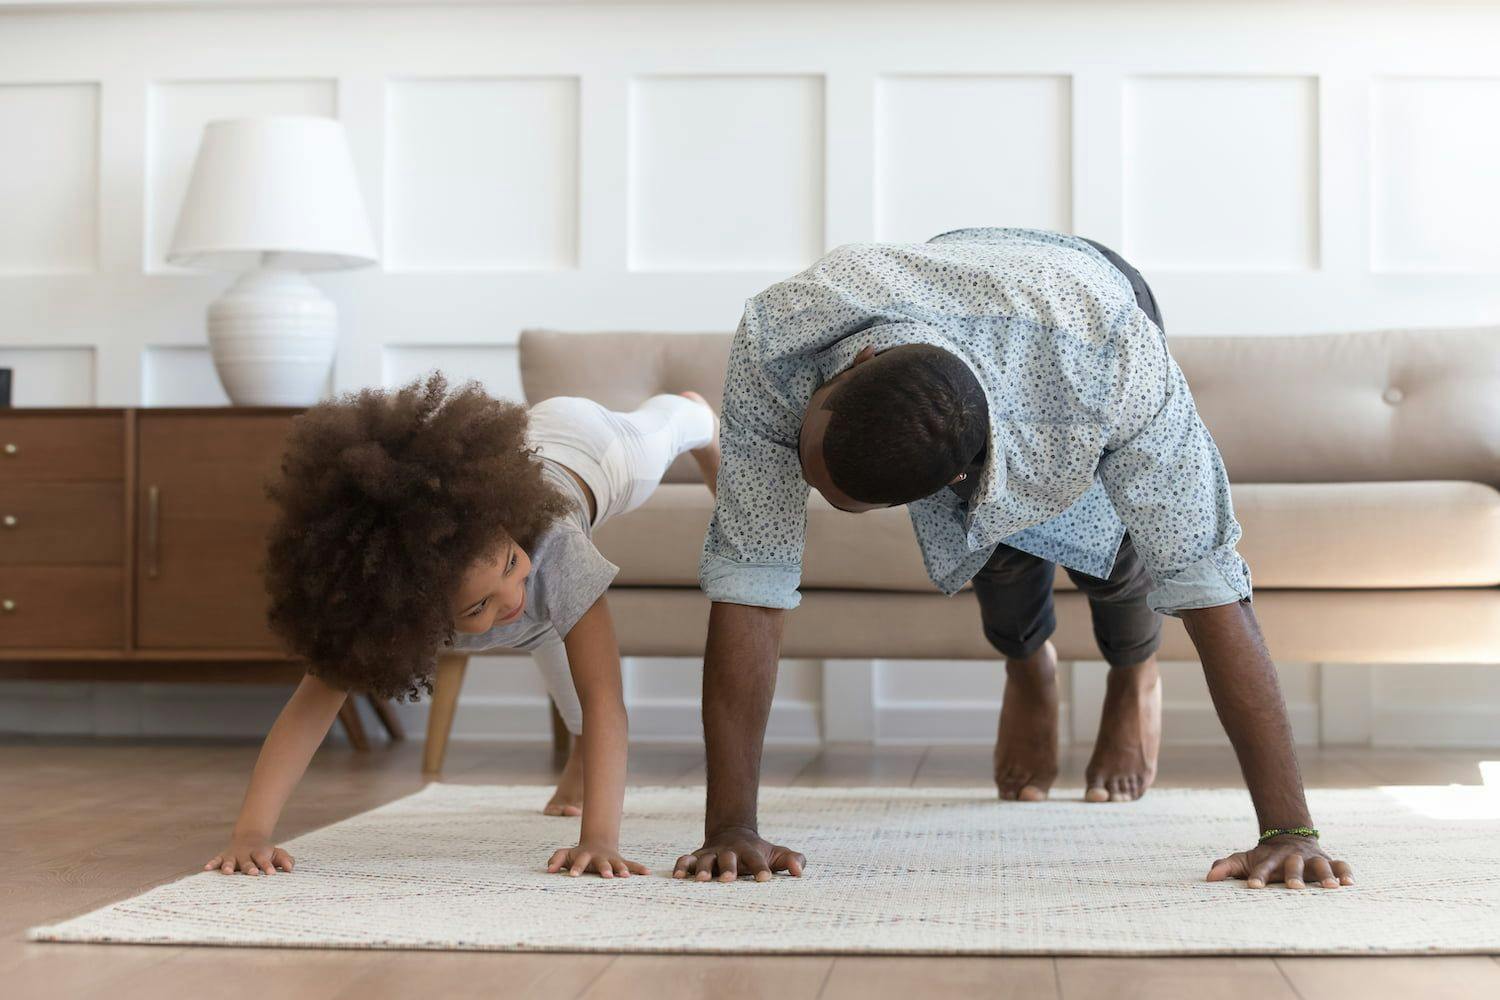 Easy ways to exercise at home and raise money for charity